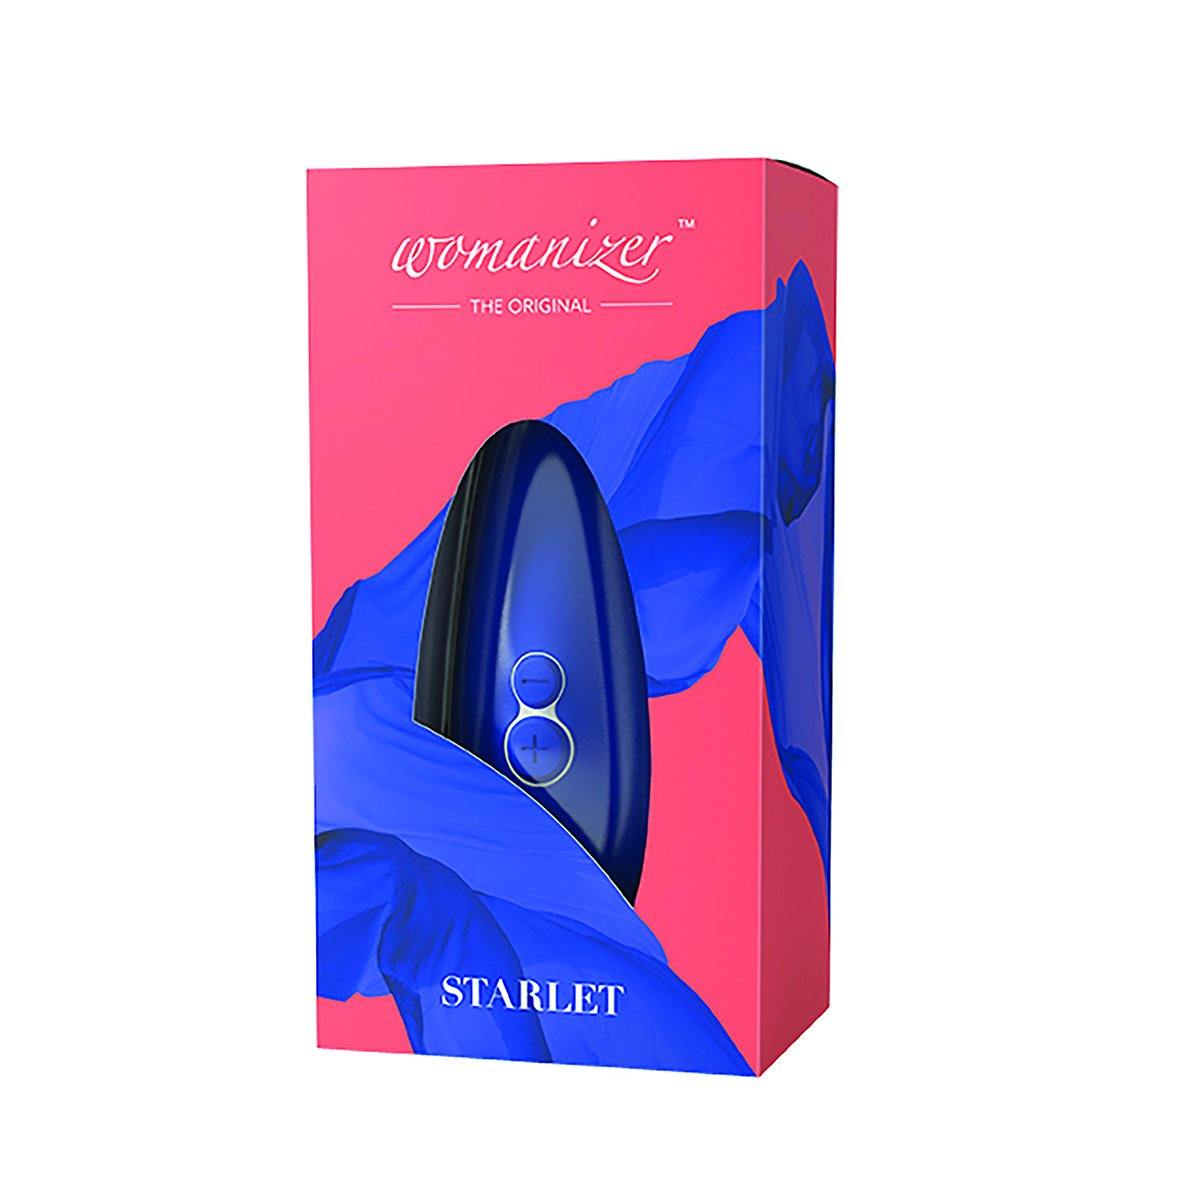 Womanizer Starlet 2 - Buy At Luxury Toy X - Free 3-Day Shipping